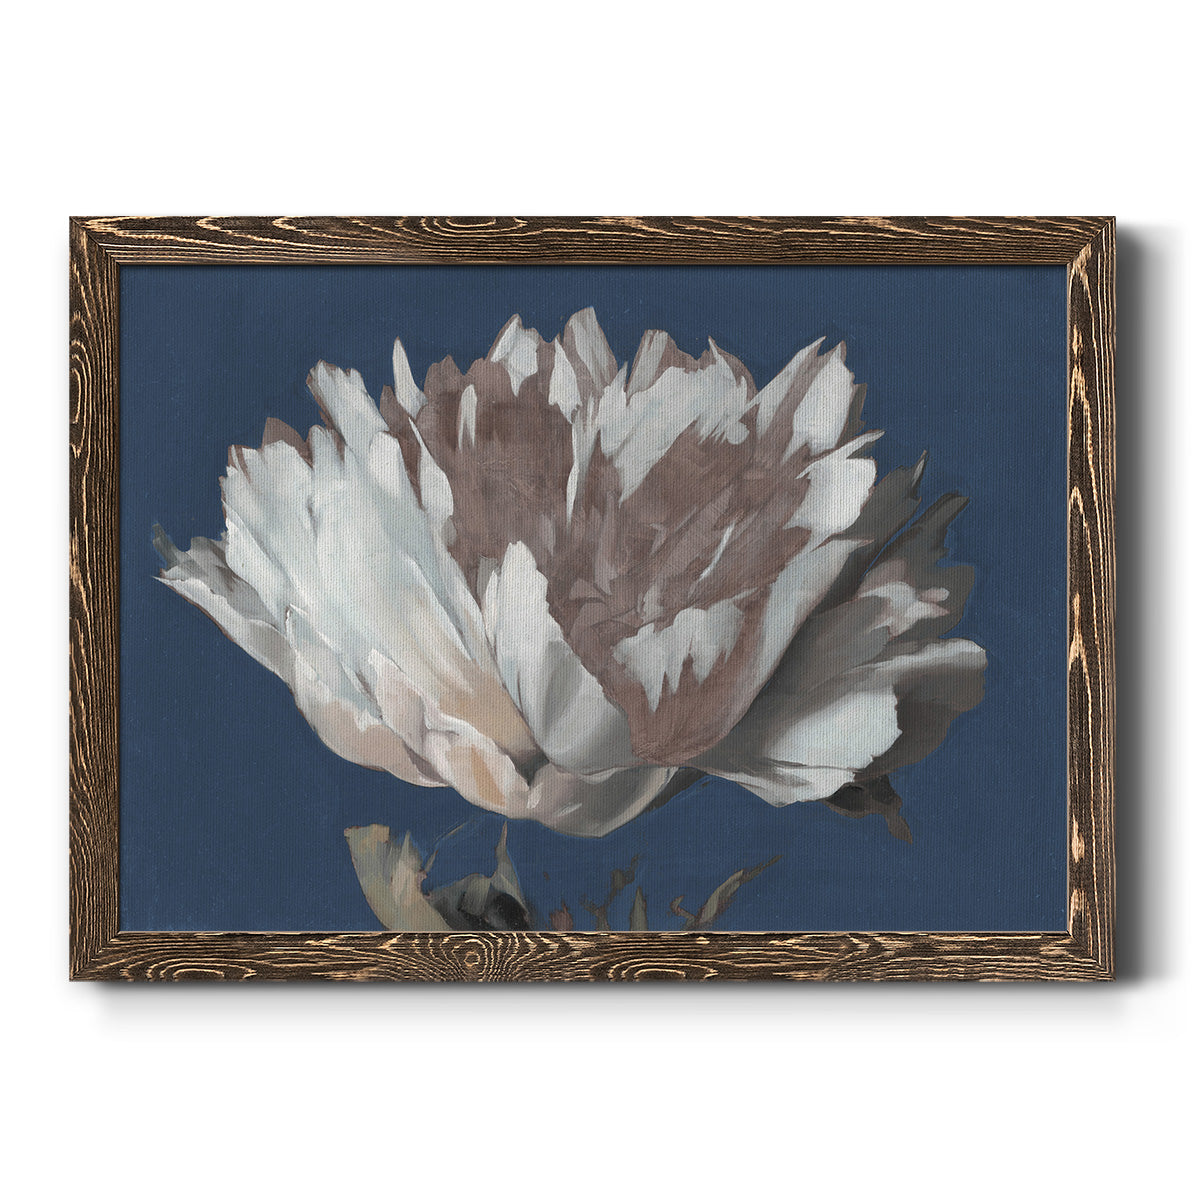 White Peony-Premium Framed Canvas - Ready to Hang